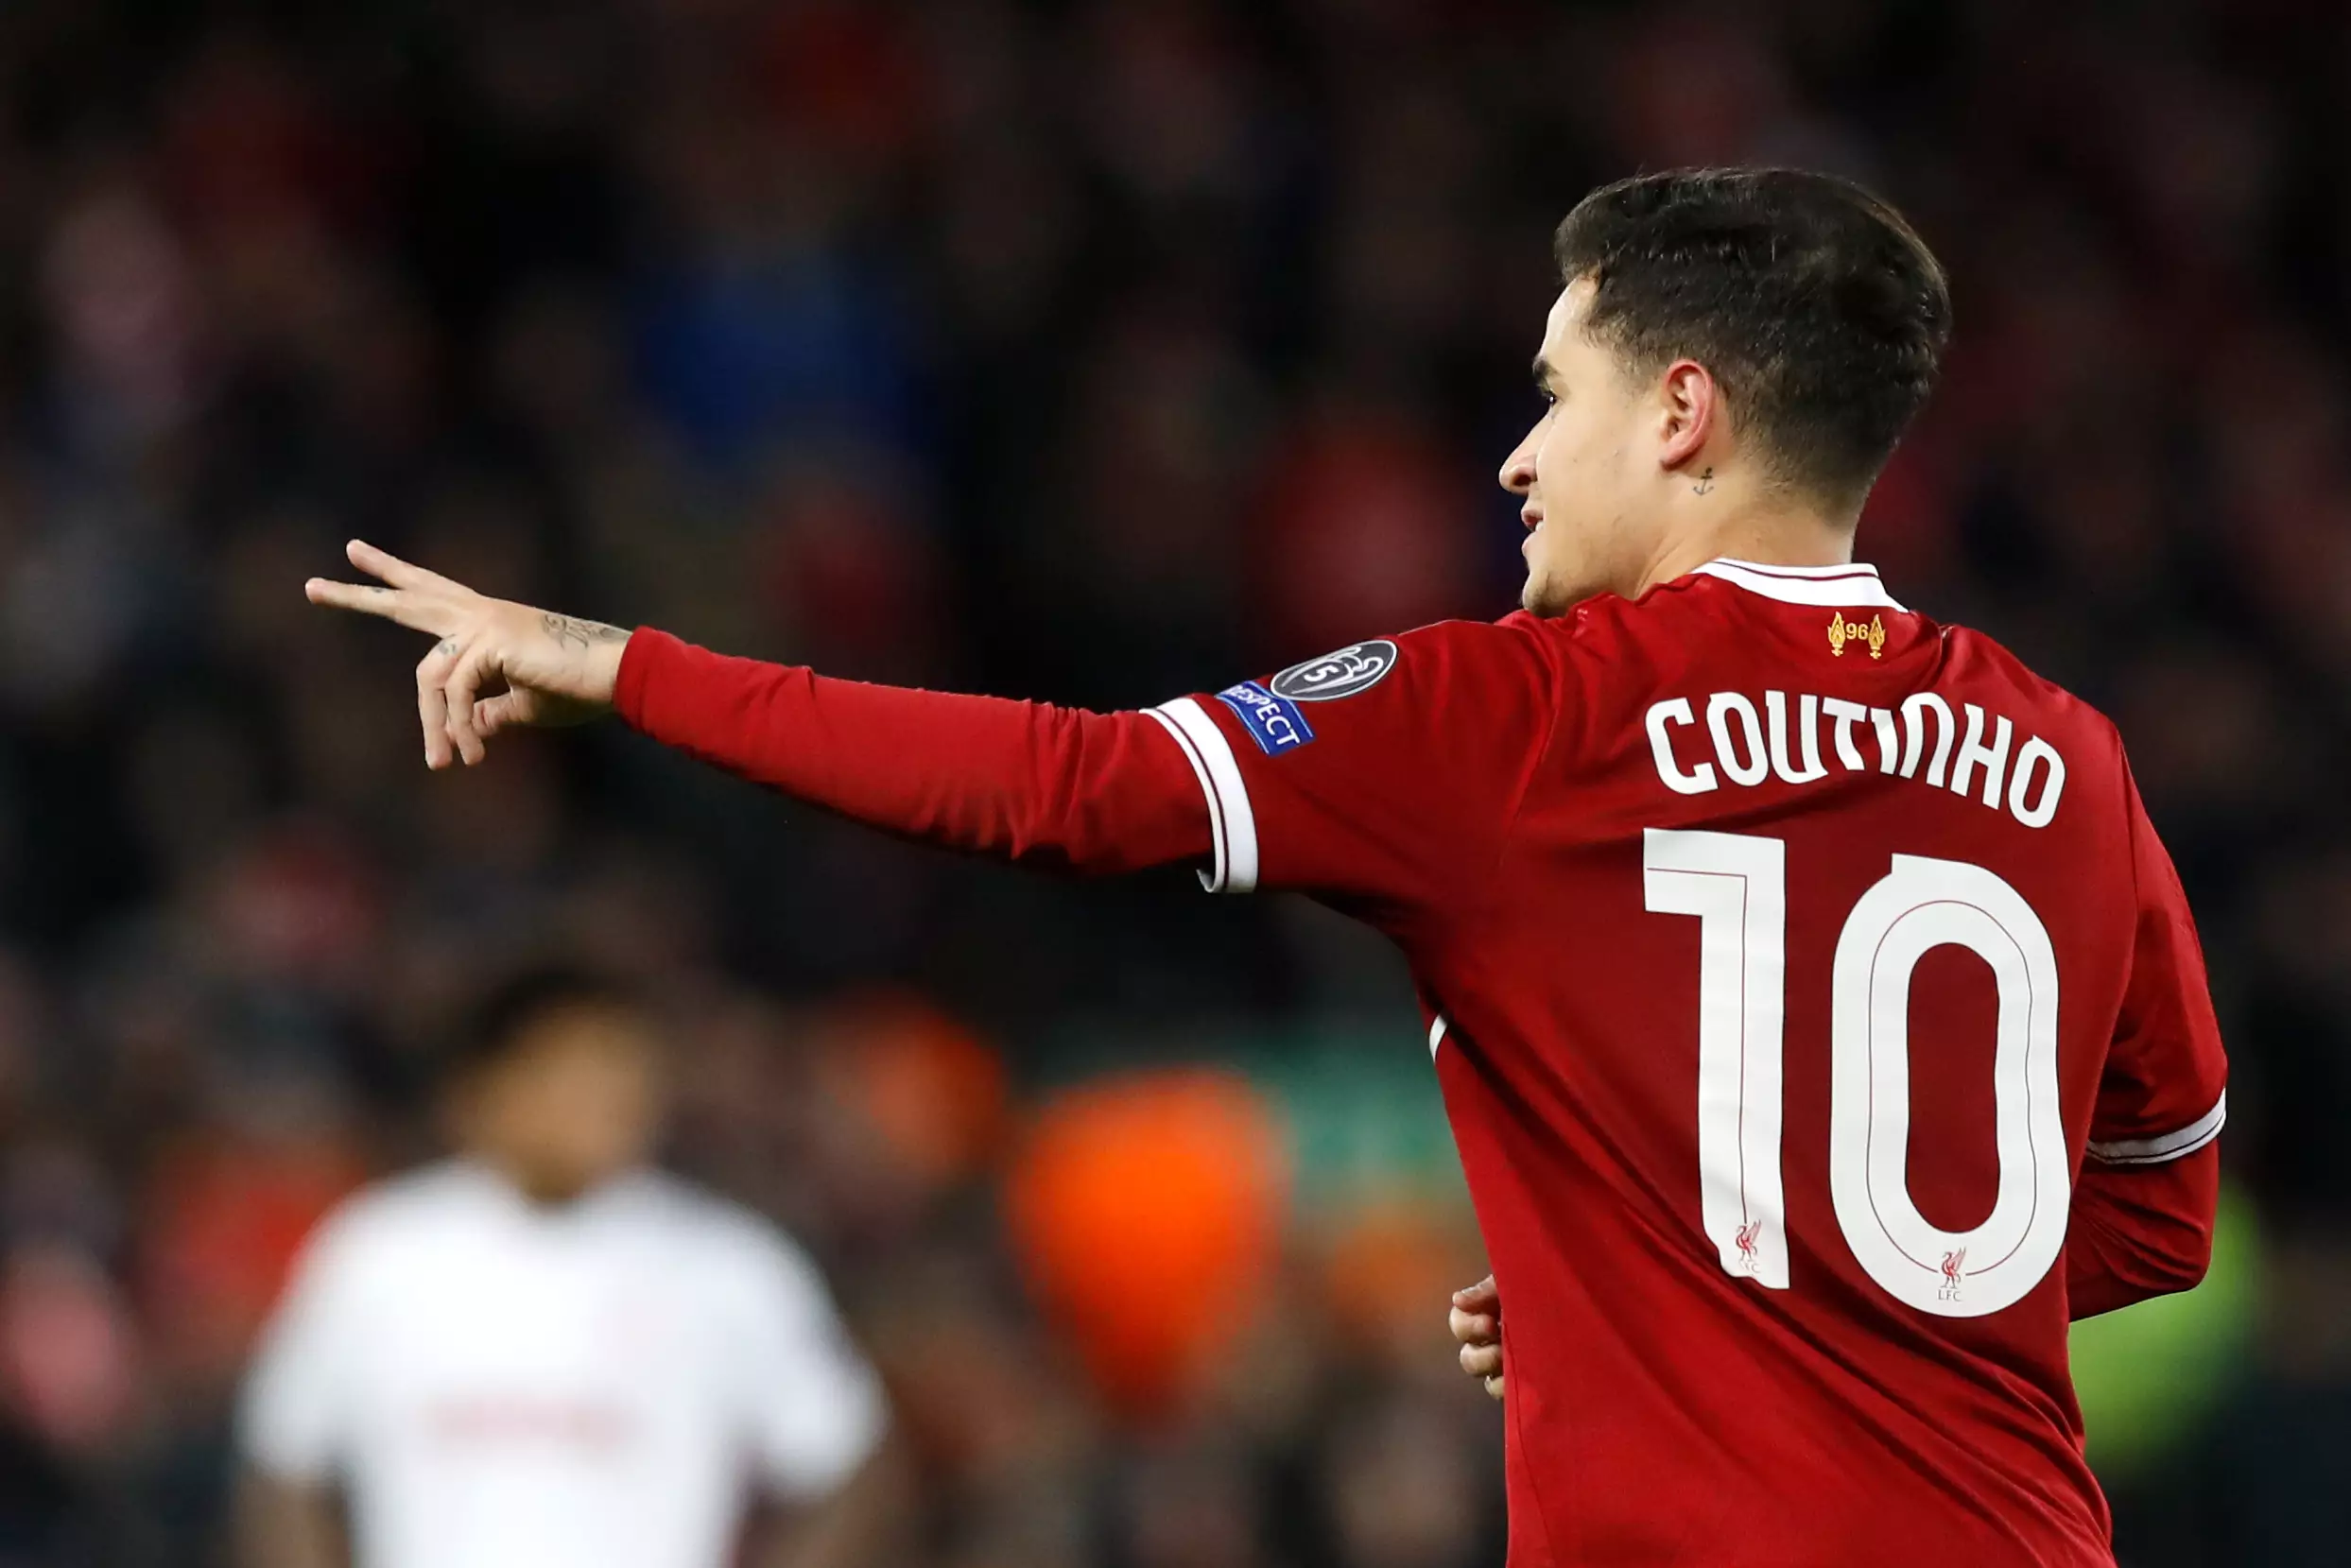 Coutinho celebrates scoring a goal in the Champions League for Liverpool. Image: PA